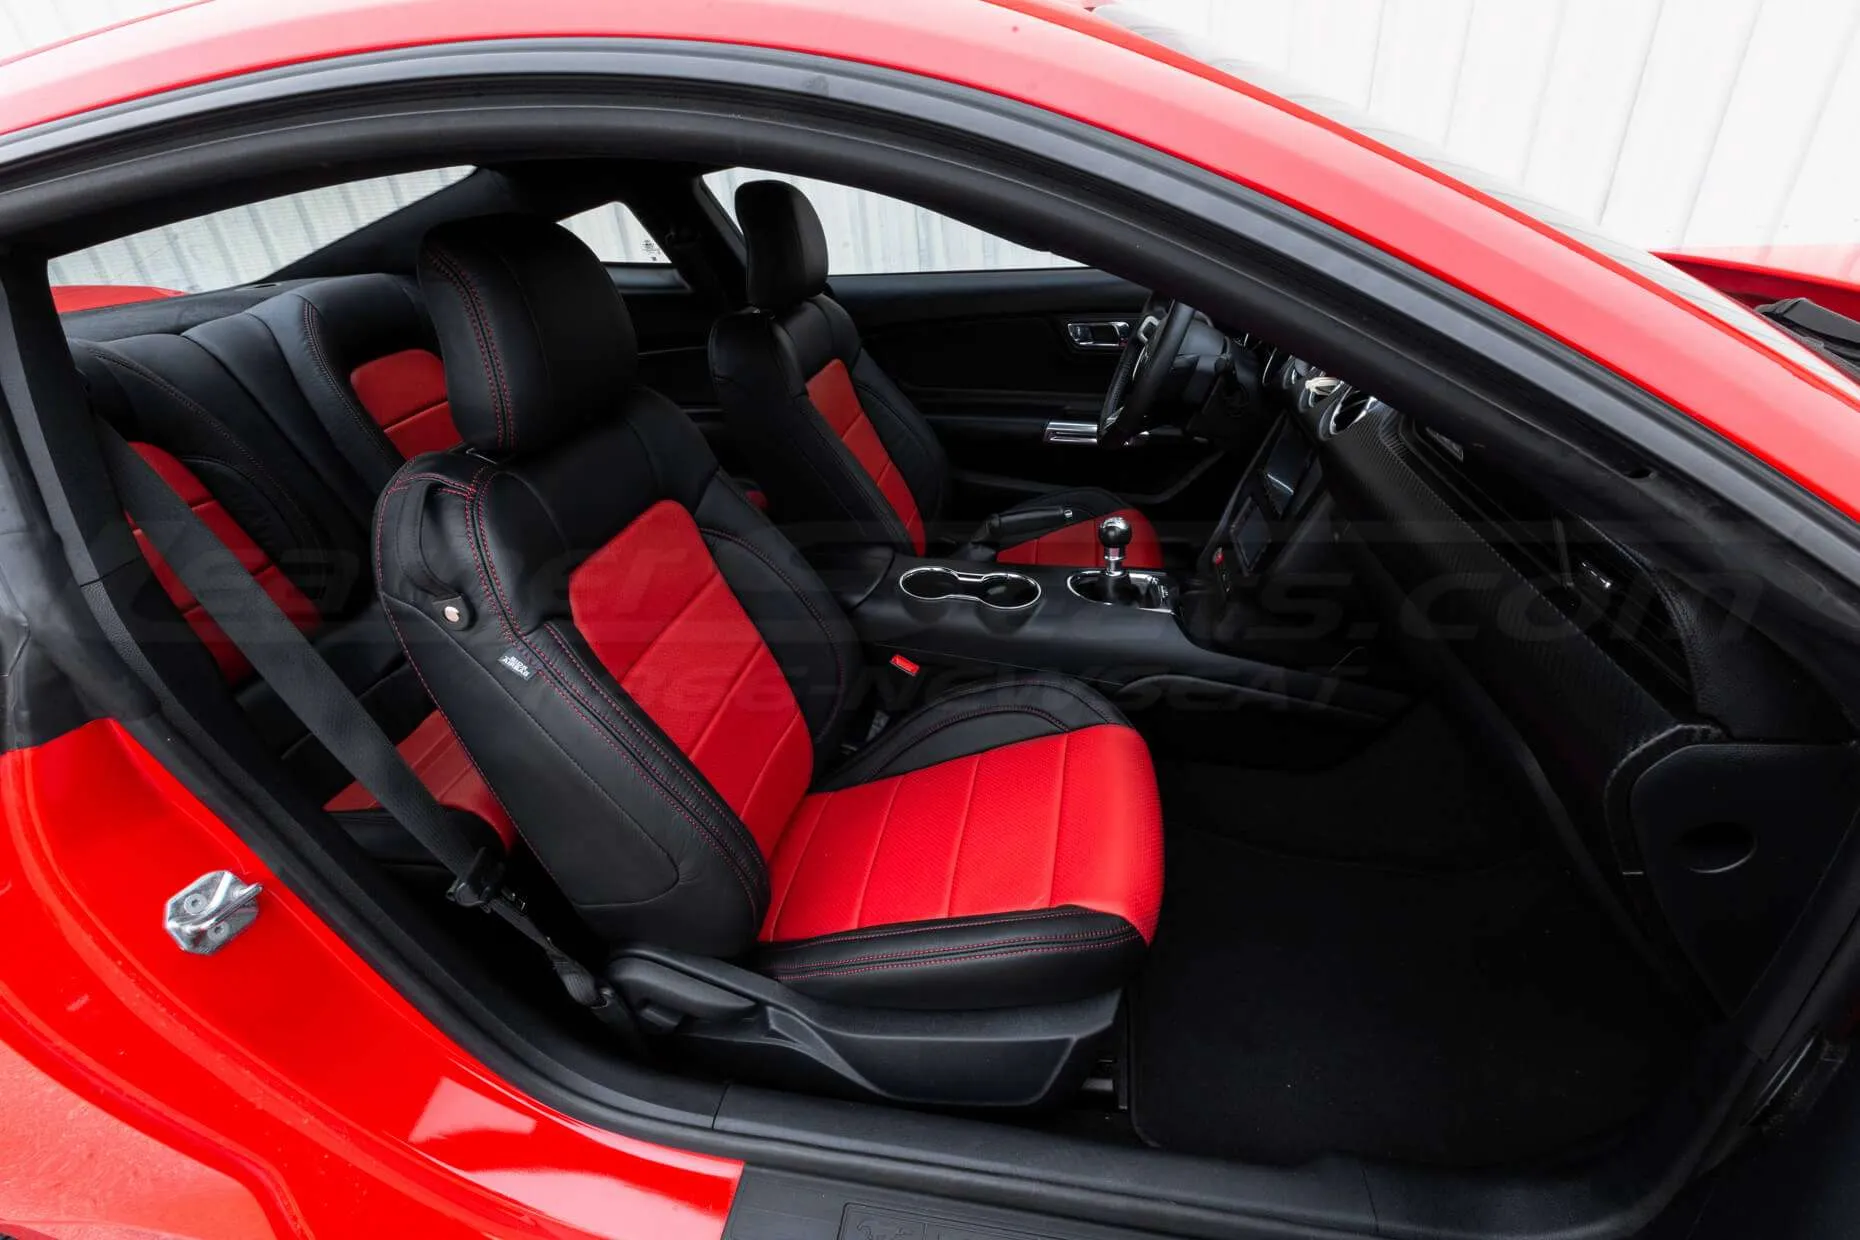 Ford Mustang installed leather kit - Black & Bright Red - Passenger side wide angle